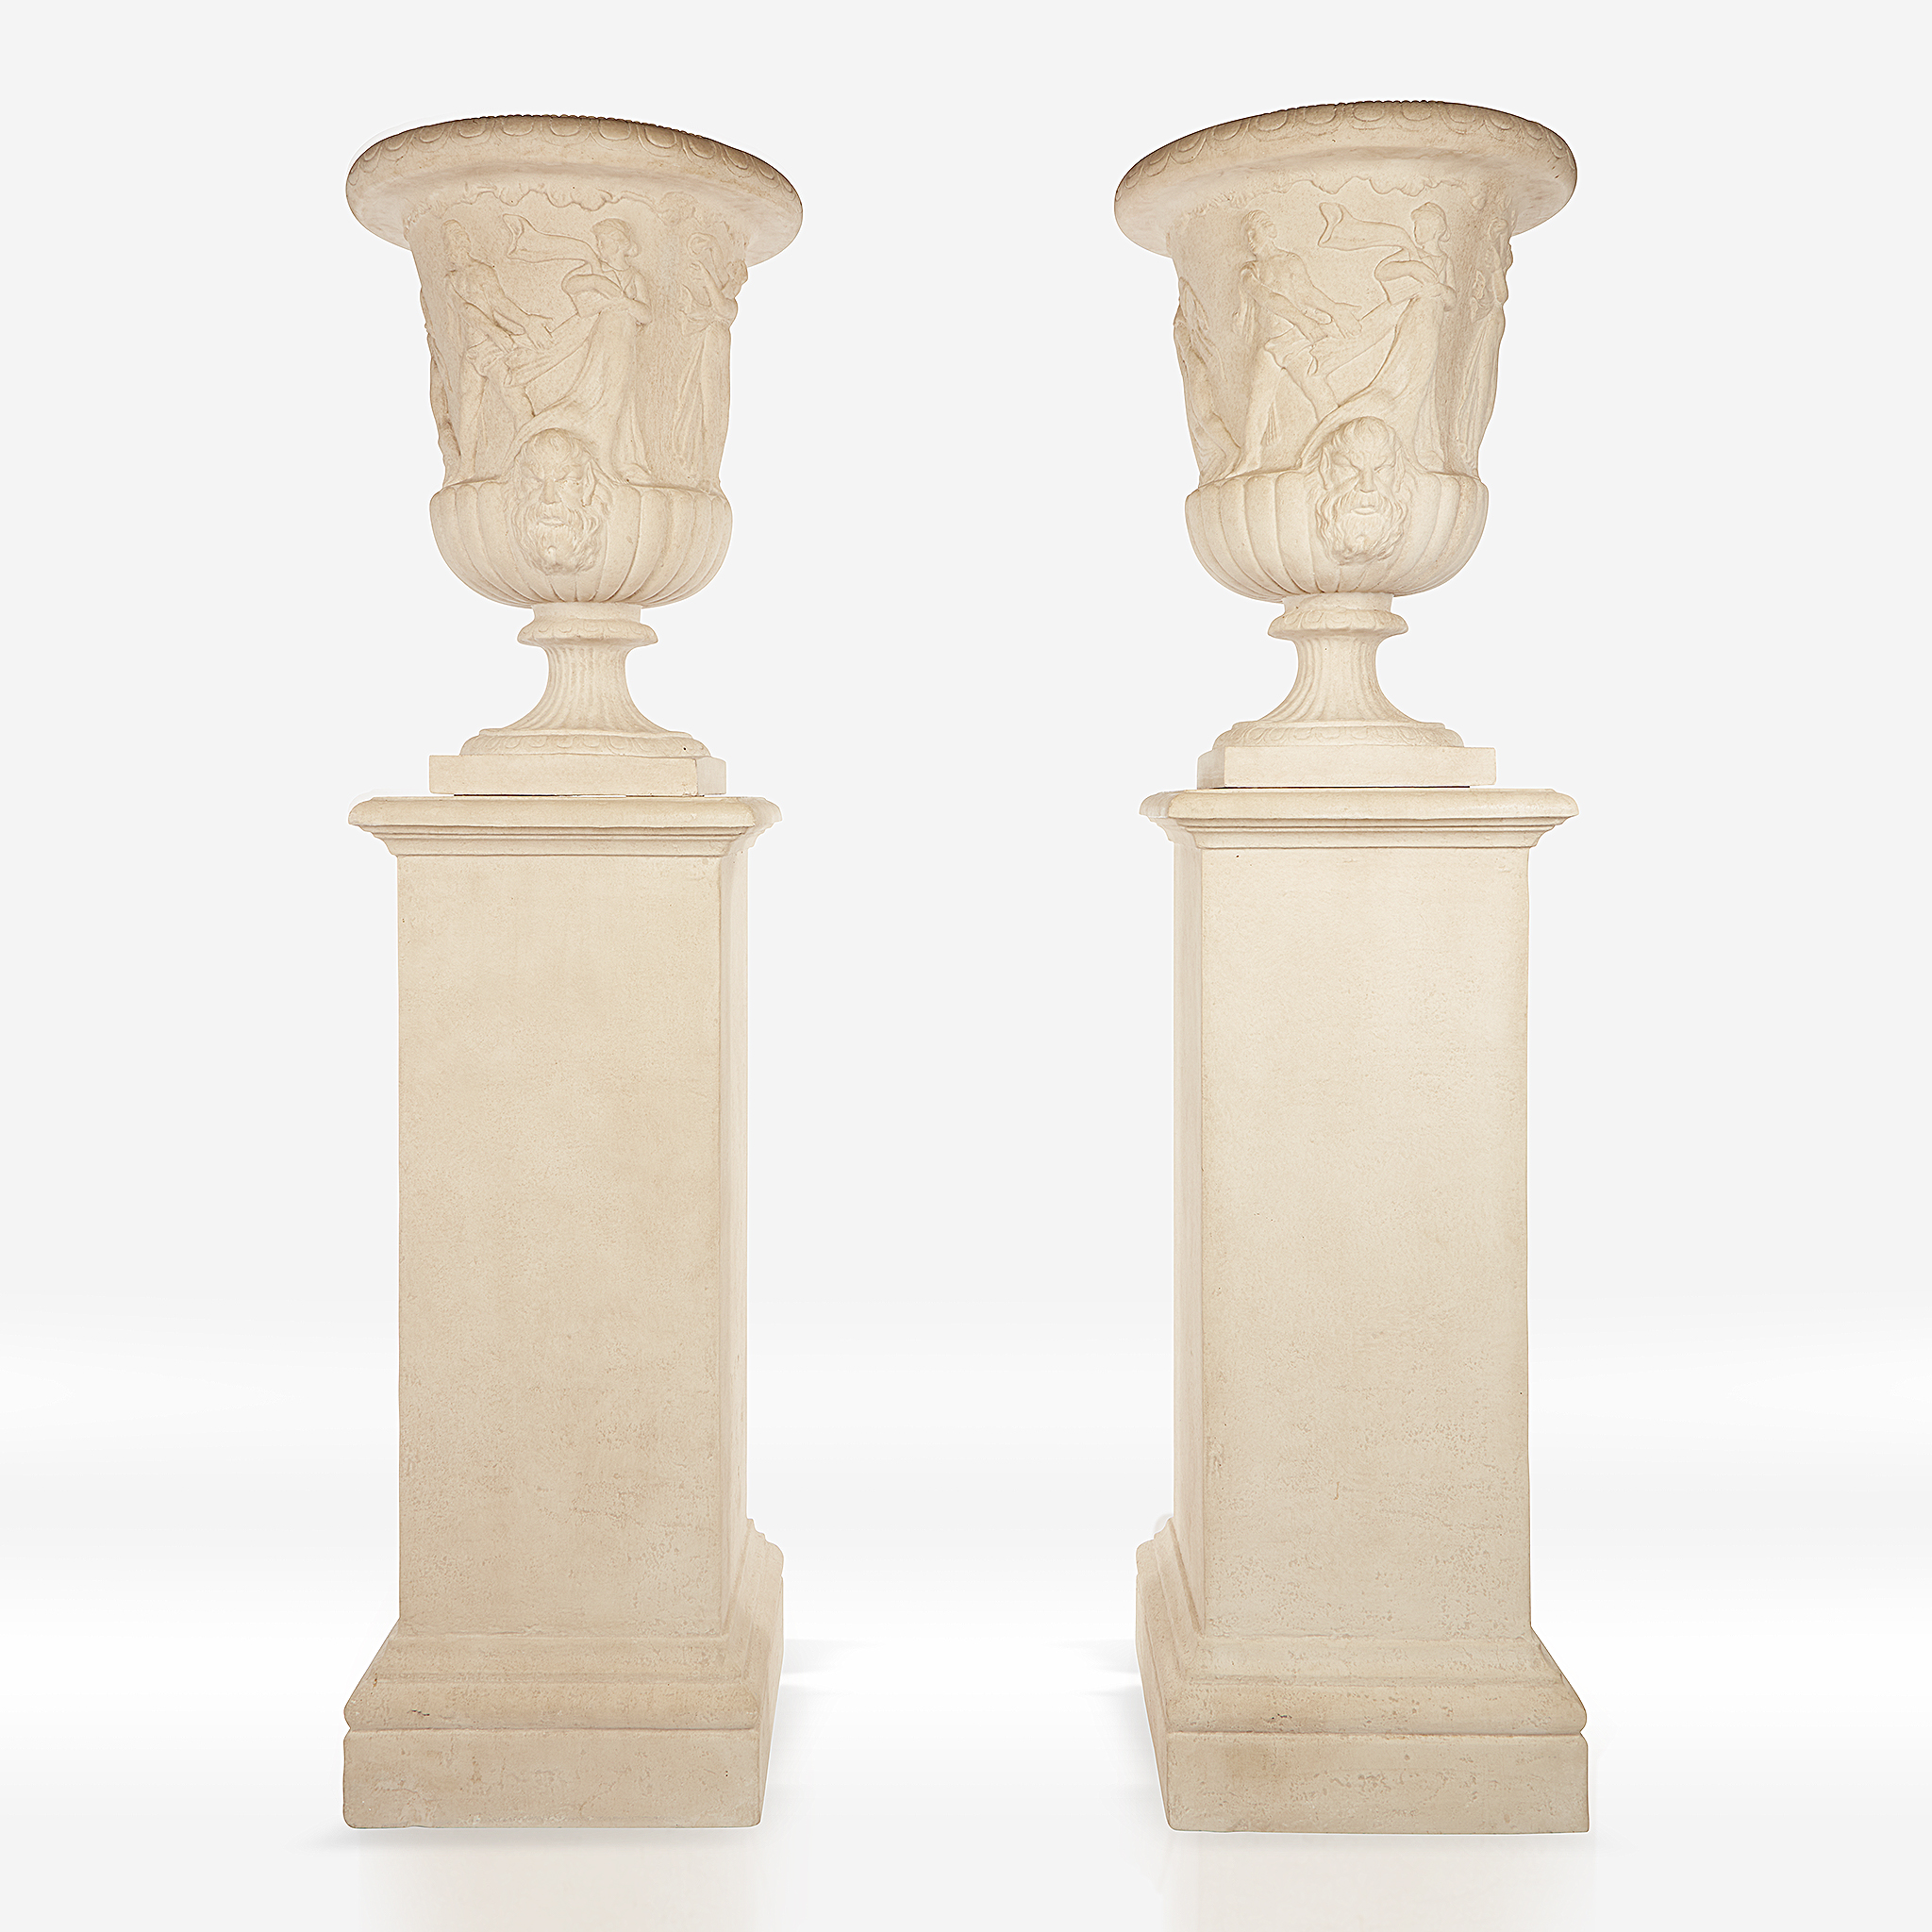 A pair of cast stone campana urns on pedestals, 20th century